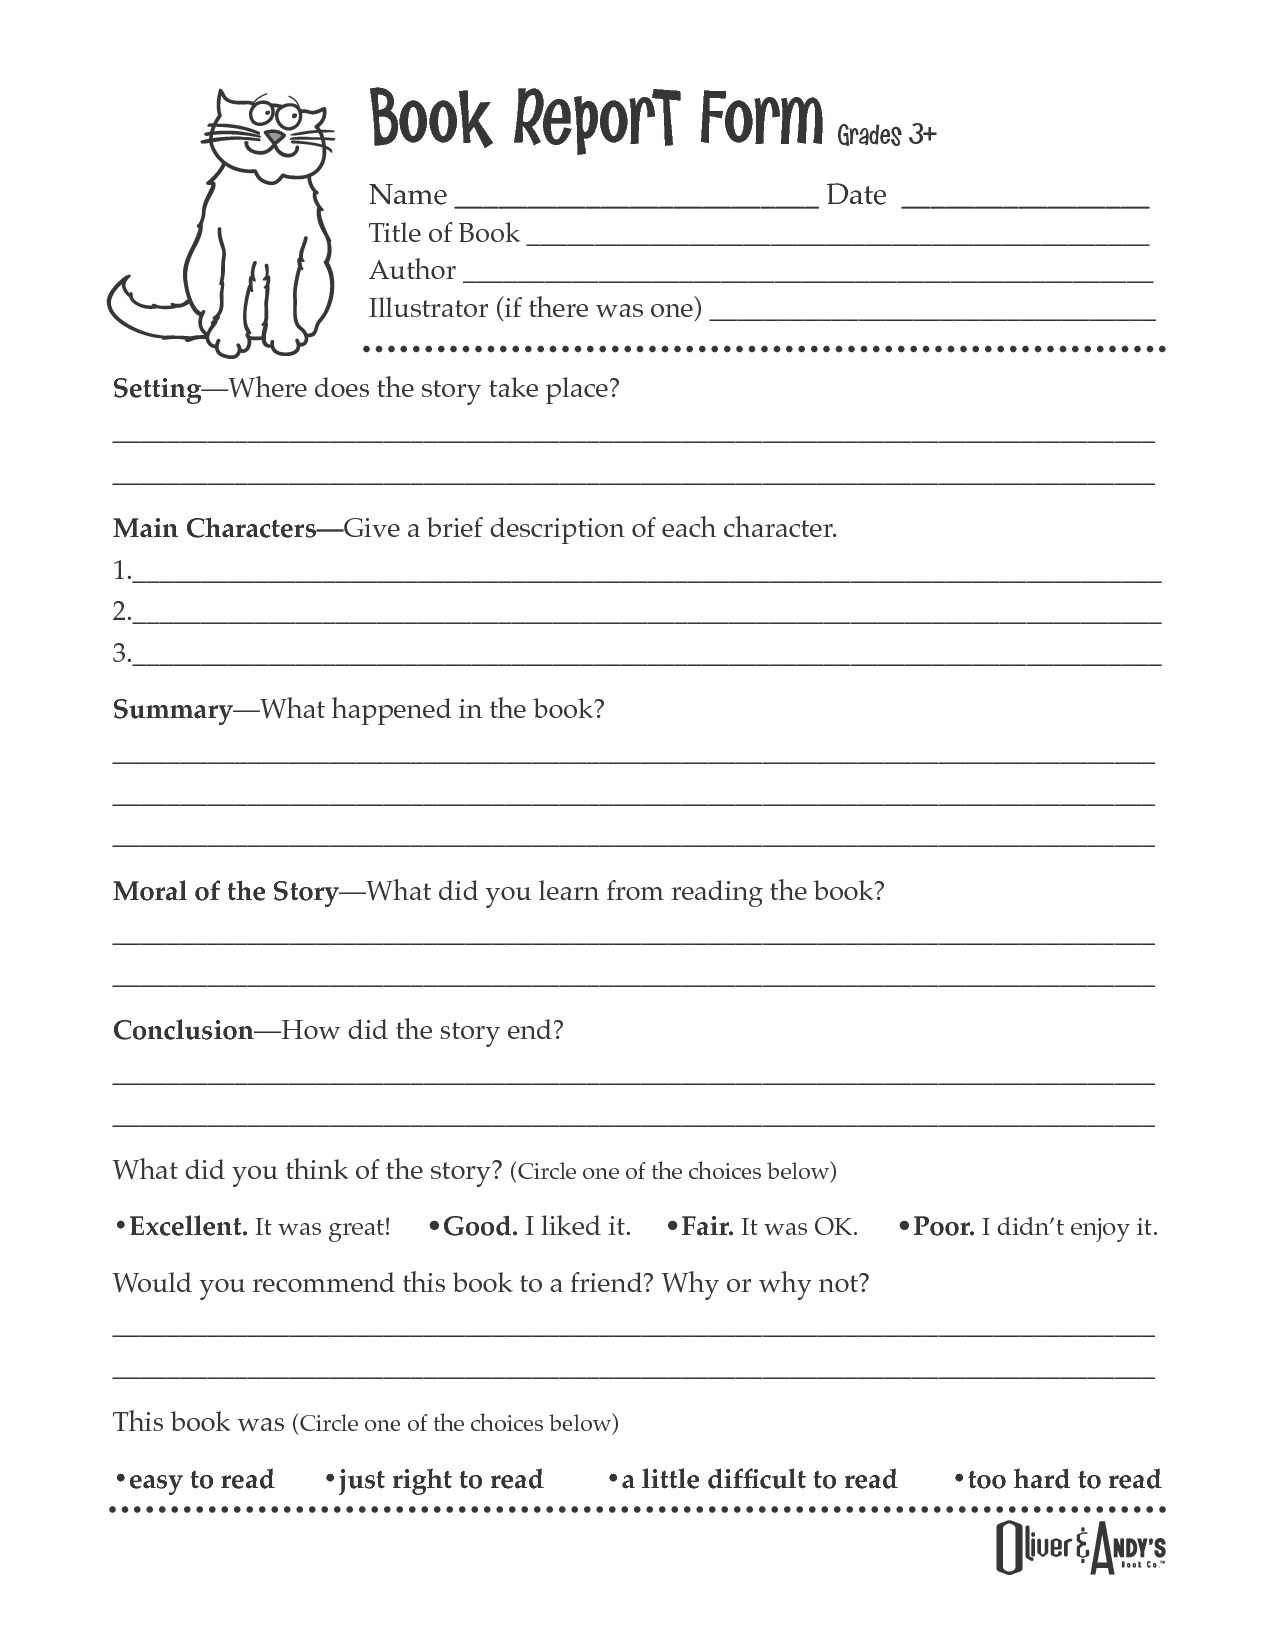 Second Grade Book Report Template | Book Report Form Grades 3+ - Free Printable Books For 5Th Graders